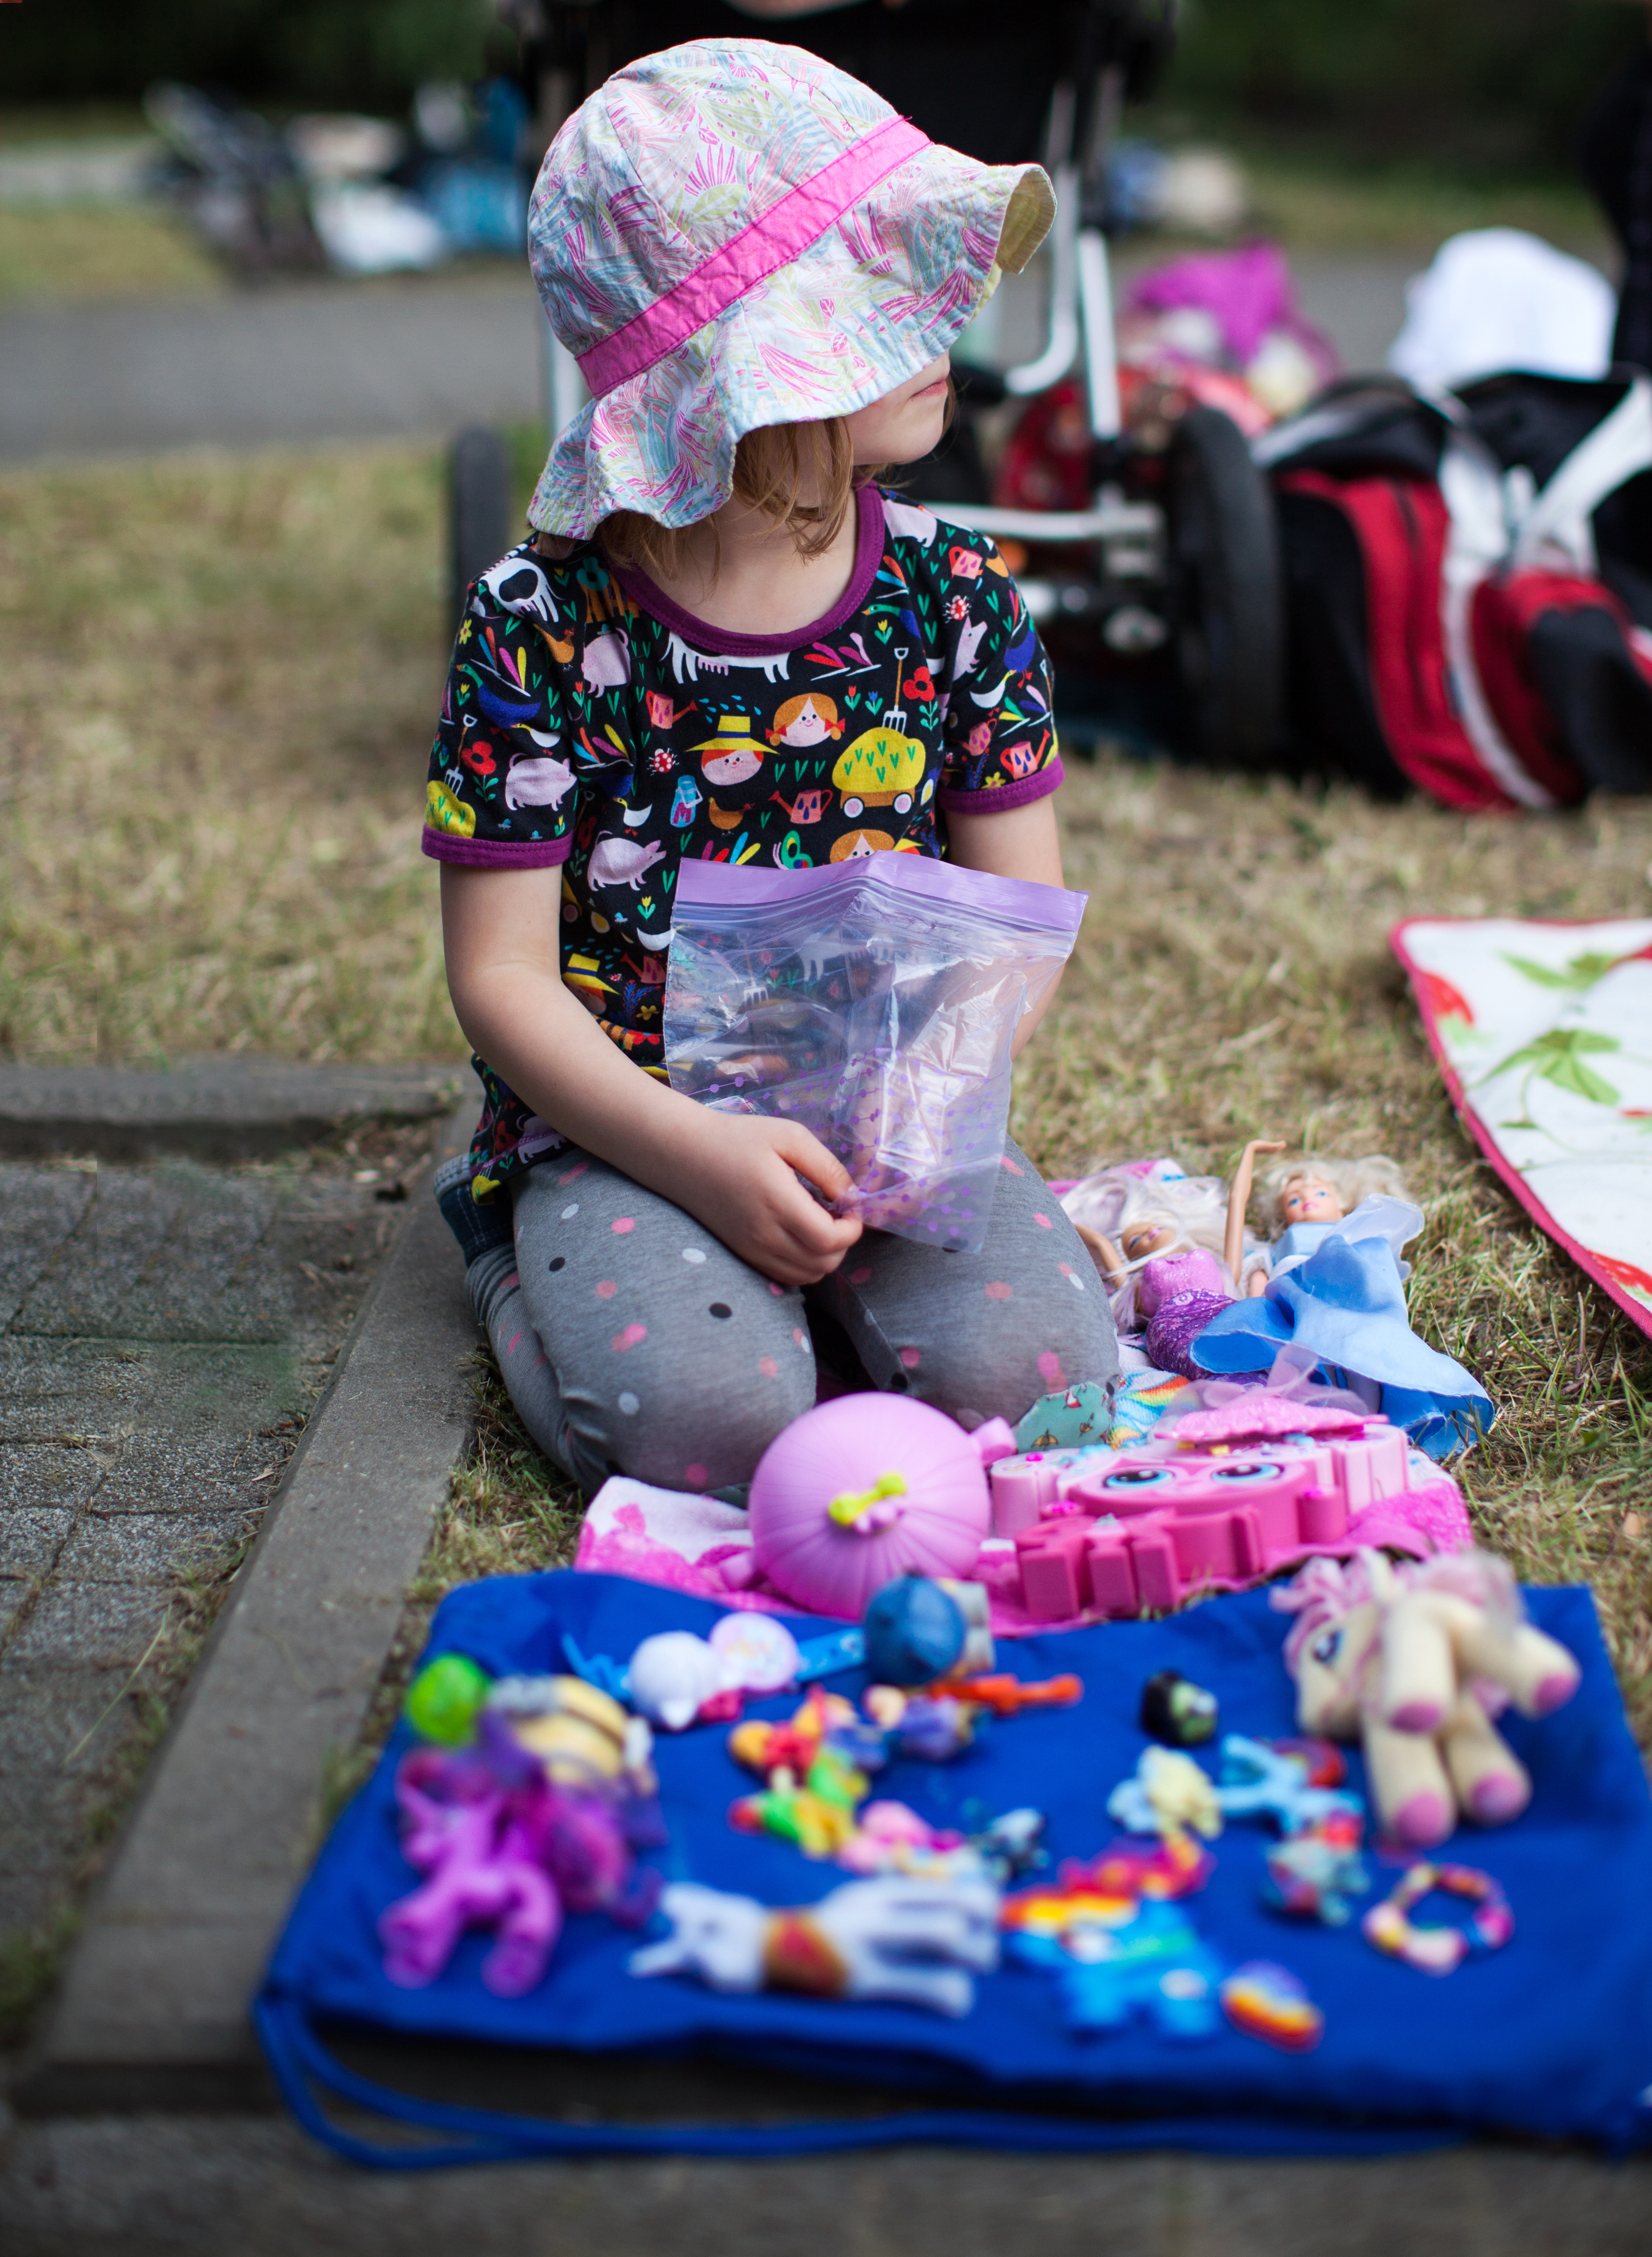 Child sitting in front of a blanket with toys arranged for a garage sale.